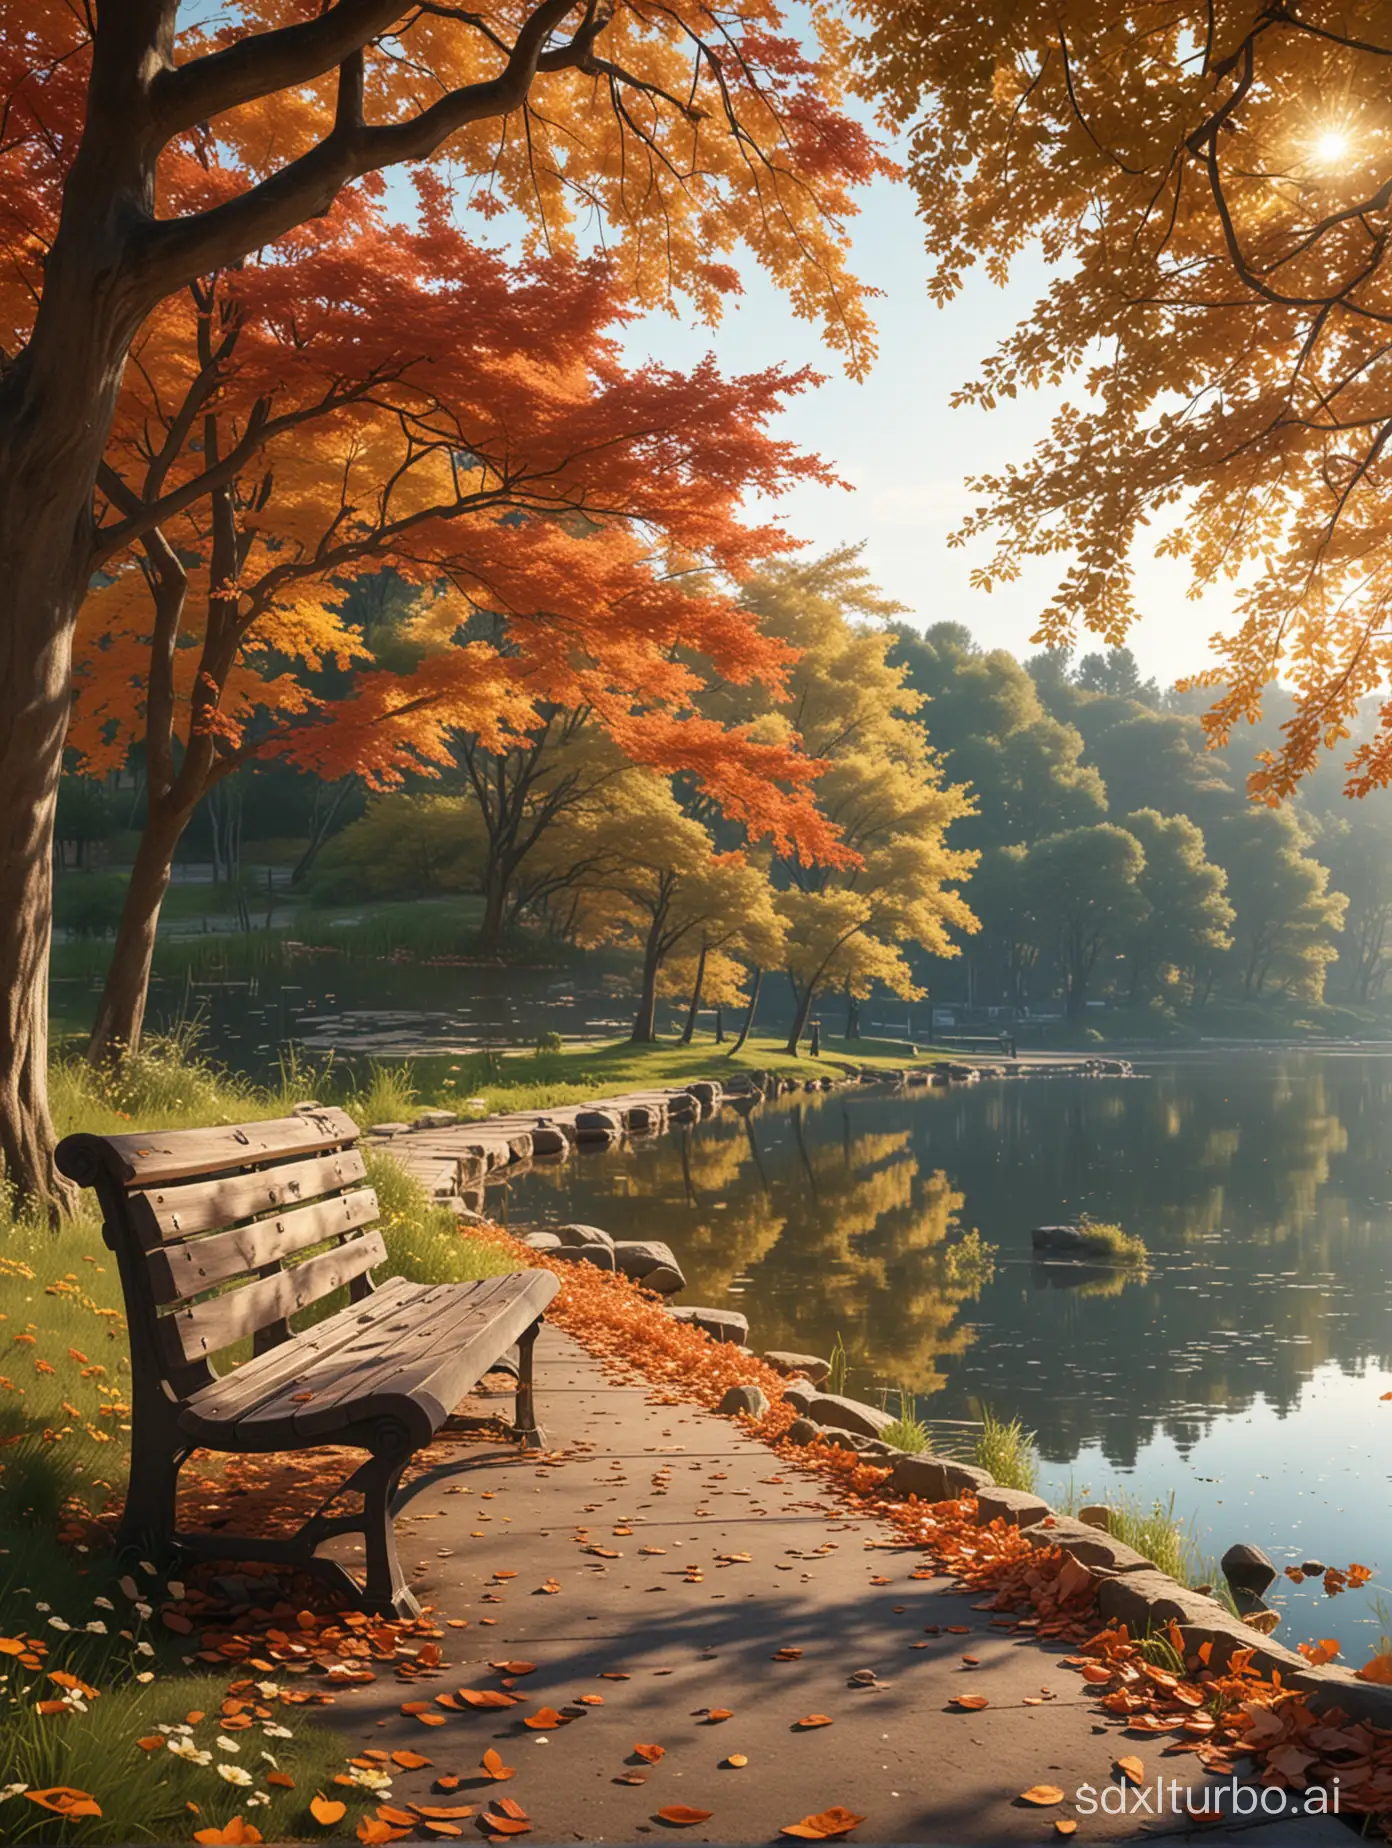 (Masterpiece) Accurate anime 8K wallpaper of a bench in a park near a lake with patches of flowers in dappled lighting, surrounded by trees and autumn leaves, the early morning is quiet and deserted. (Highest quality)